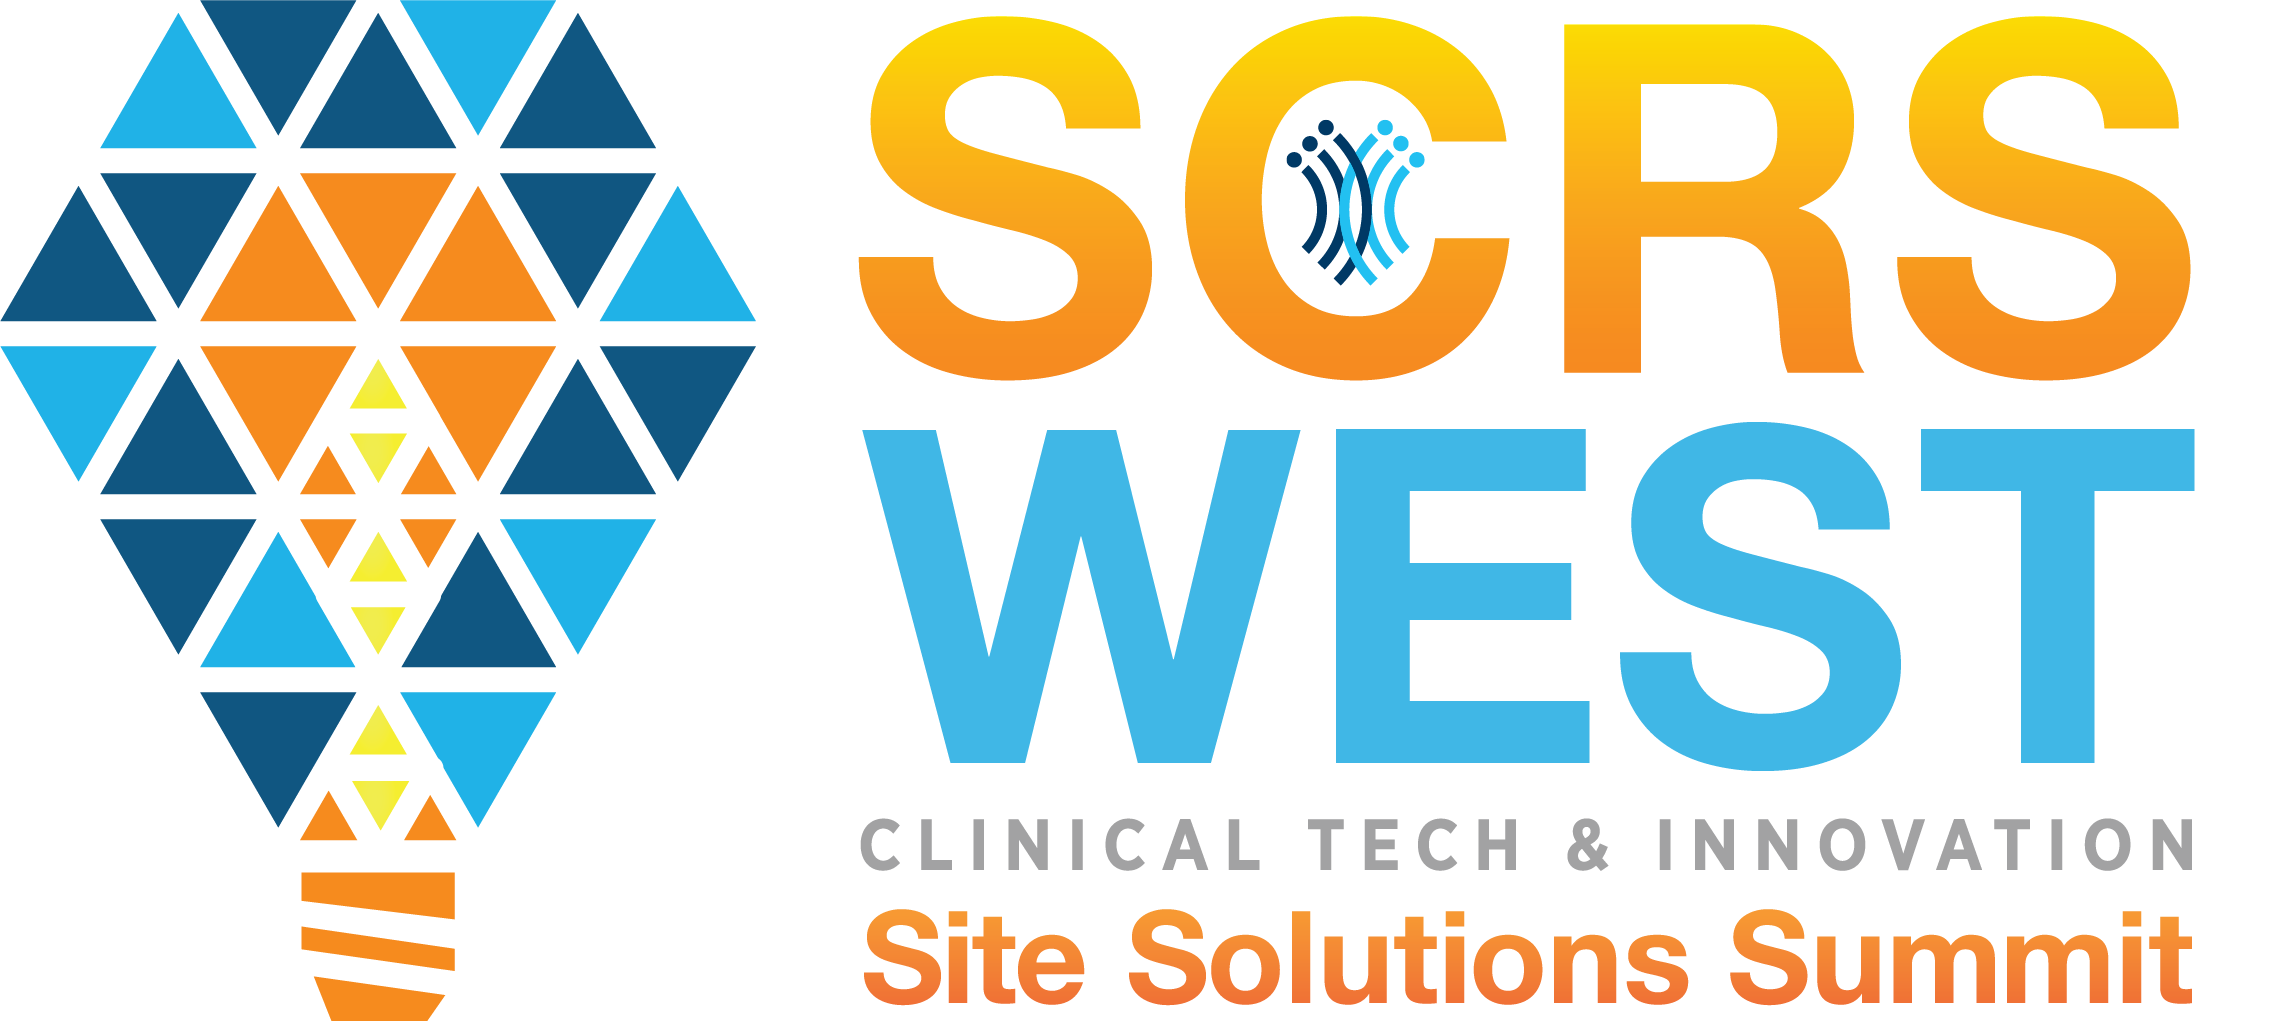 Logo SCRS West Coast Site Solutions Summit